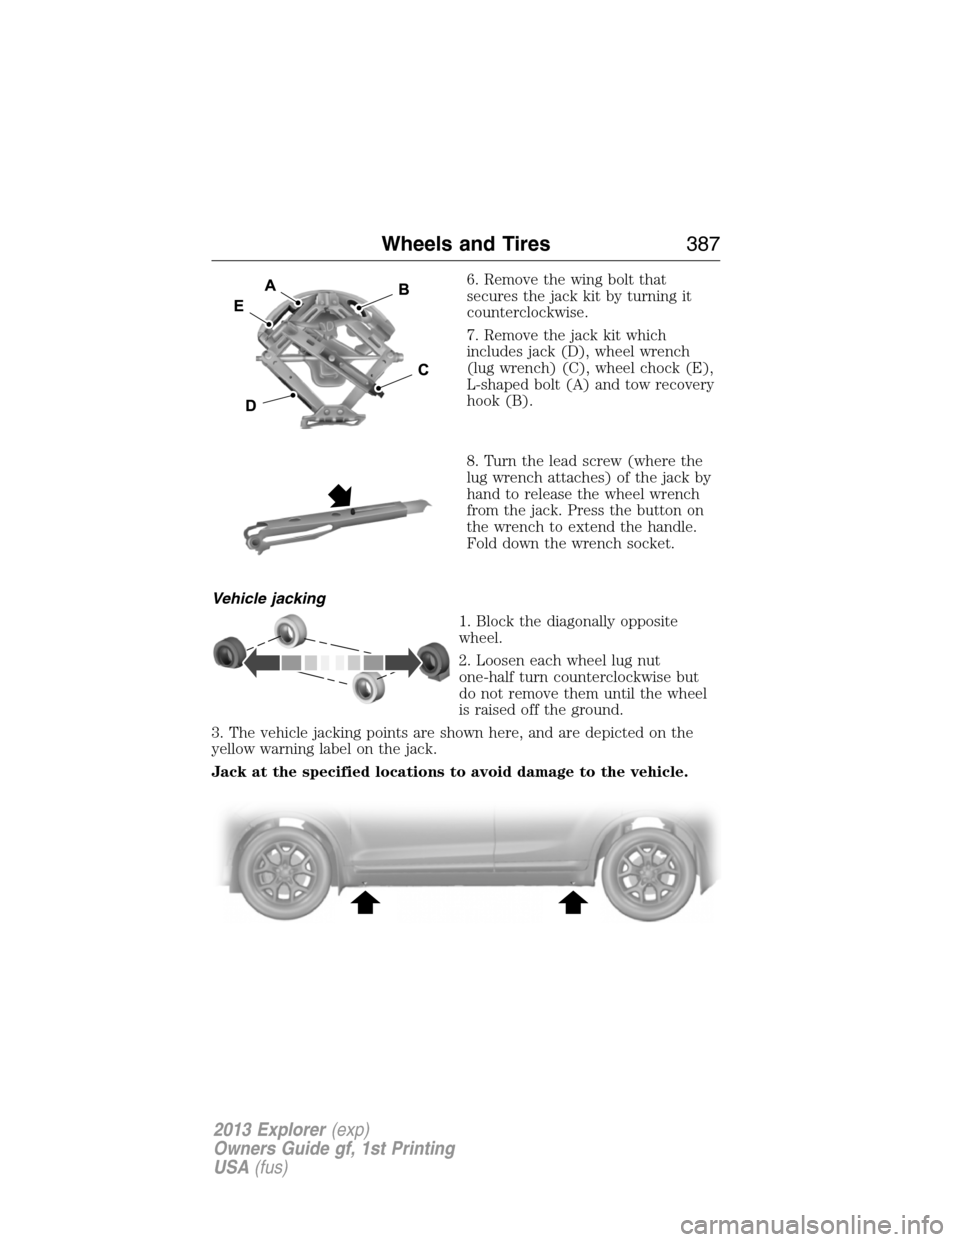 FORD EXPLORER 2013 5.G Owners Manual 6. Remove the wing bolt that
secures the jack kit by turning it
counterclockwise.
7. Remove the jack kit which
includes jack (D), wheel wrench
(lug wrench) (C), wheel chock (E),
L-shaped bolt (A) and 